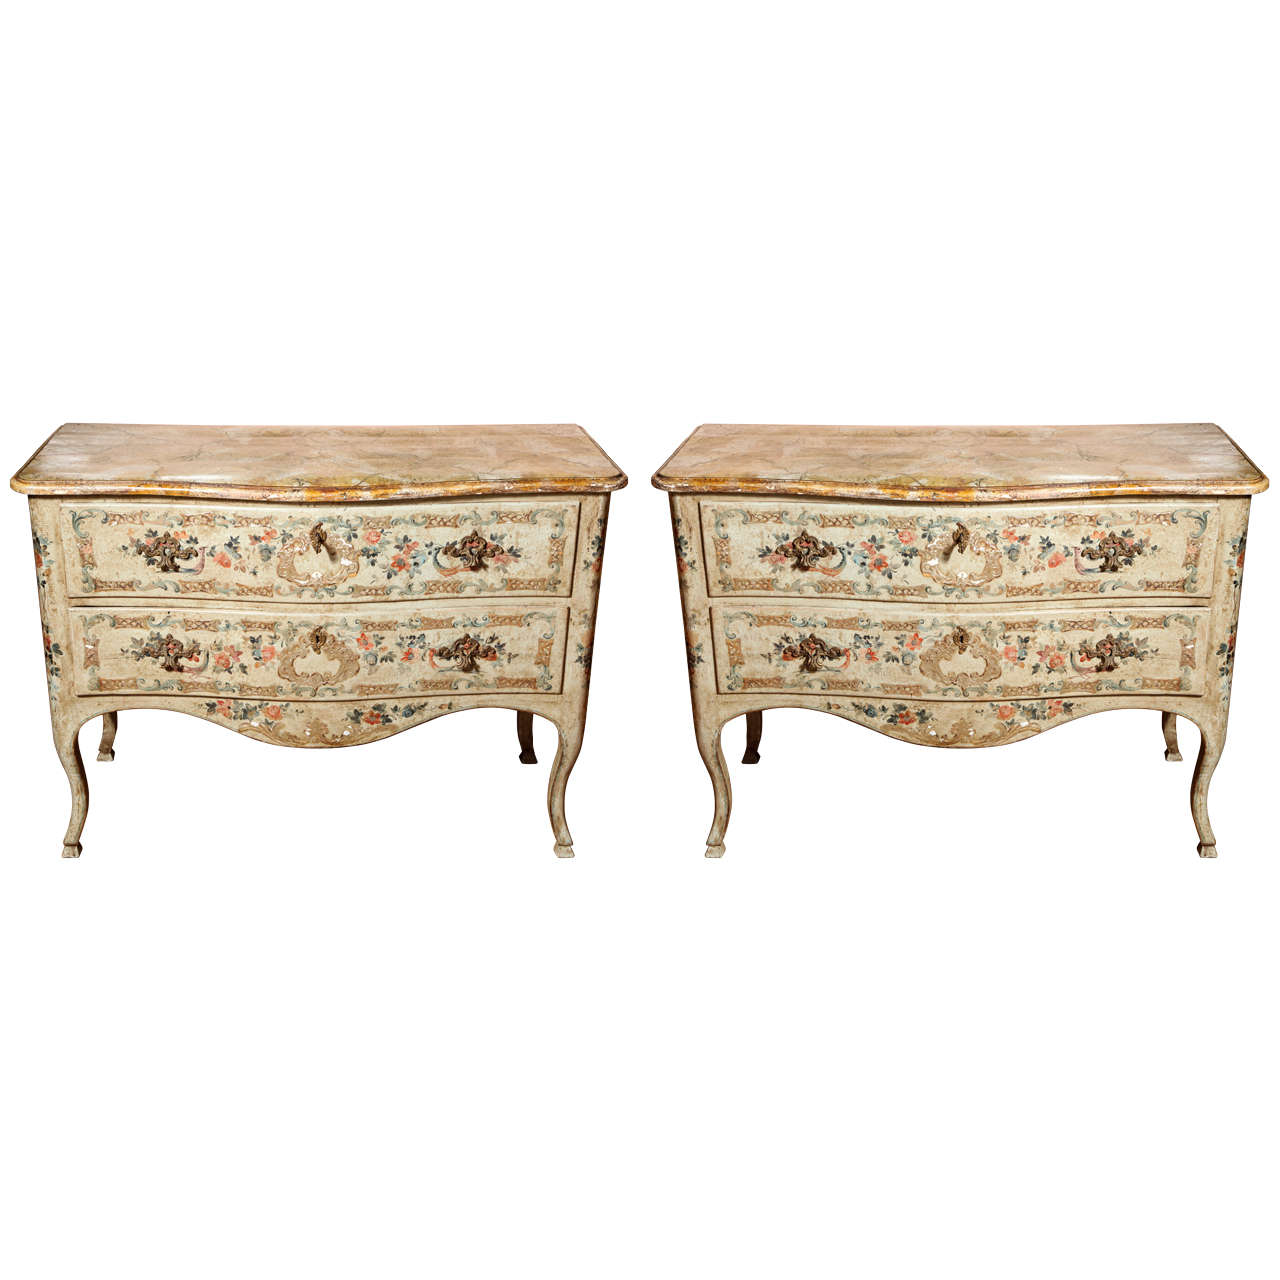 A Pair of Italian Rococo Style Painted Commodes For Sale